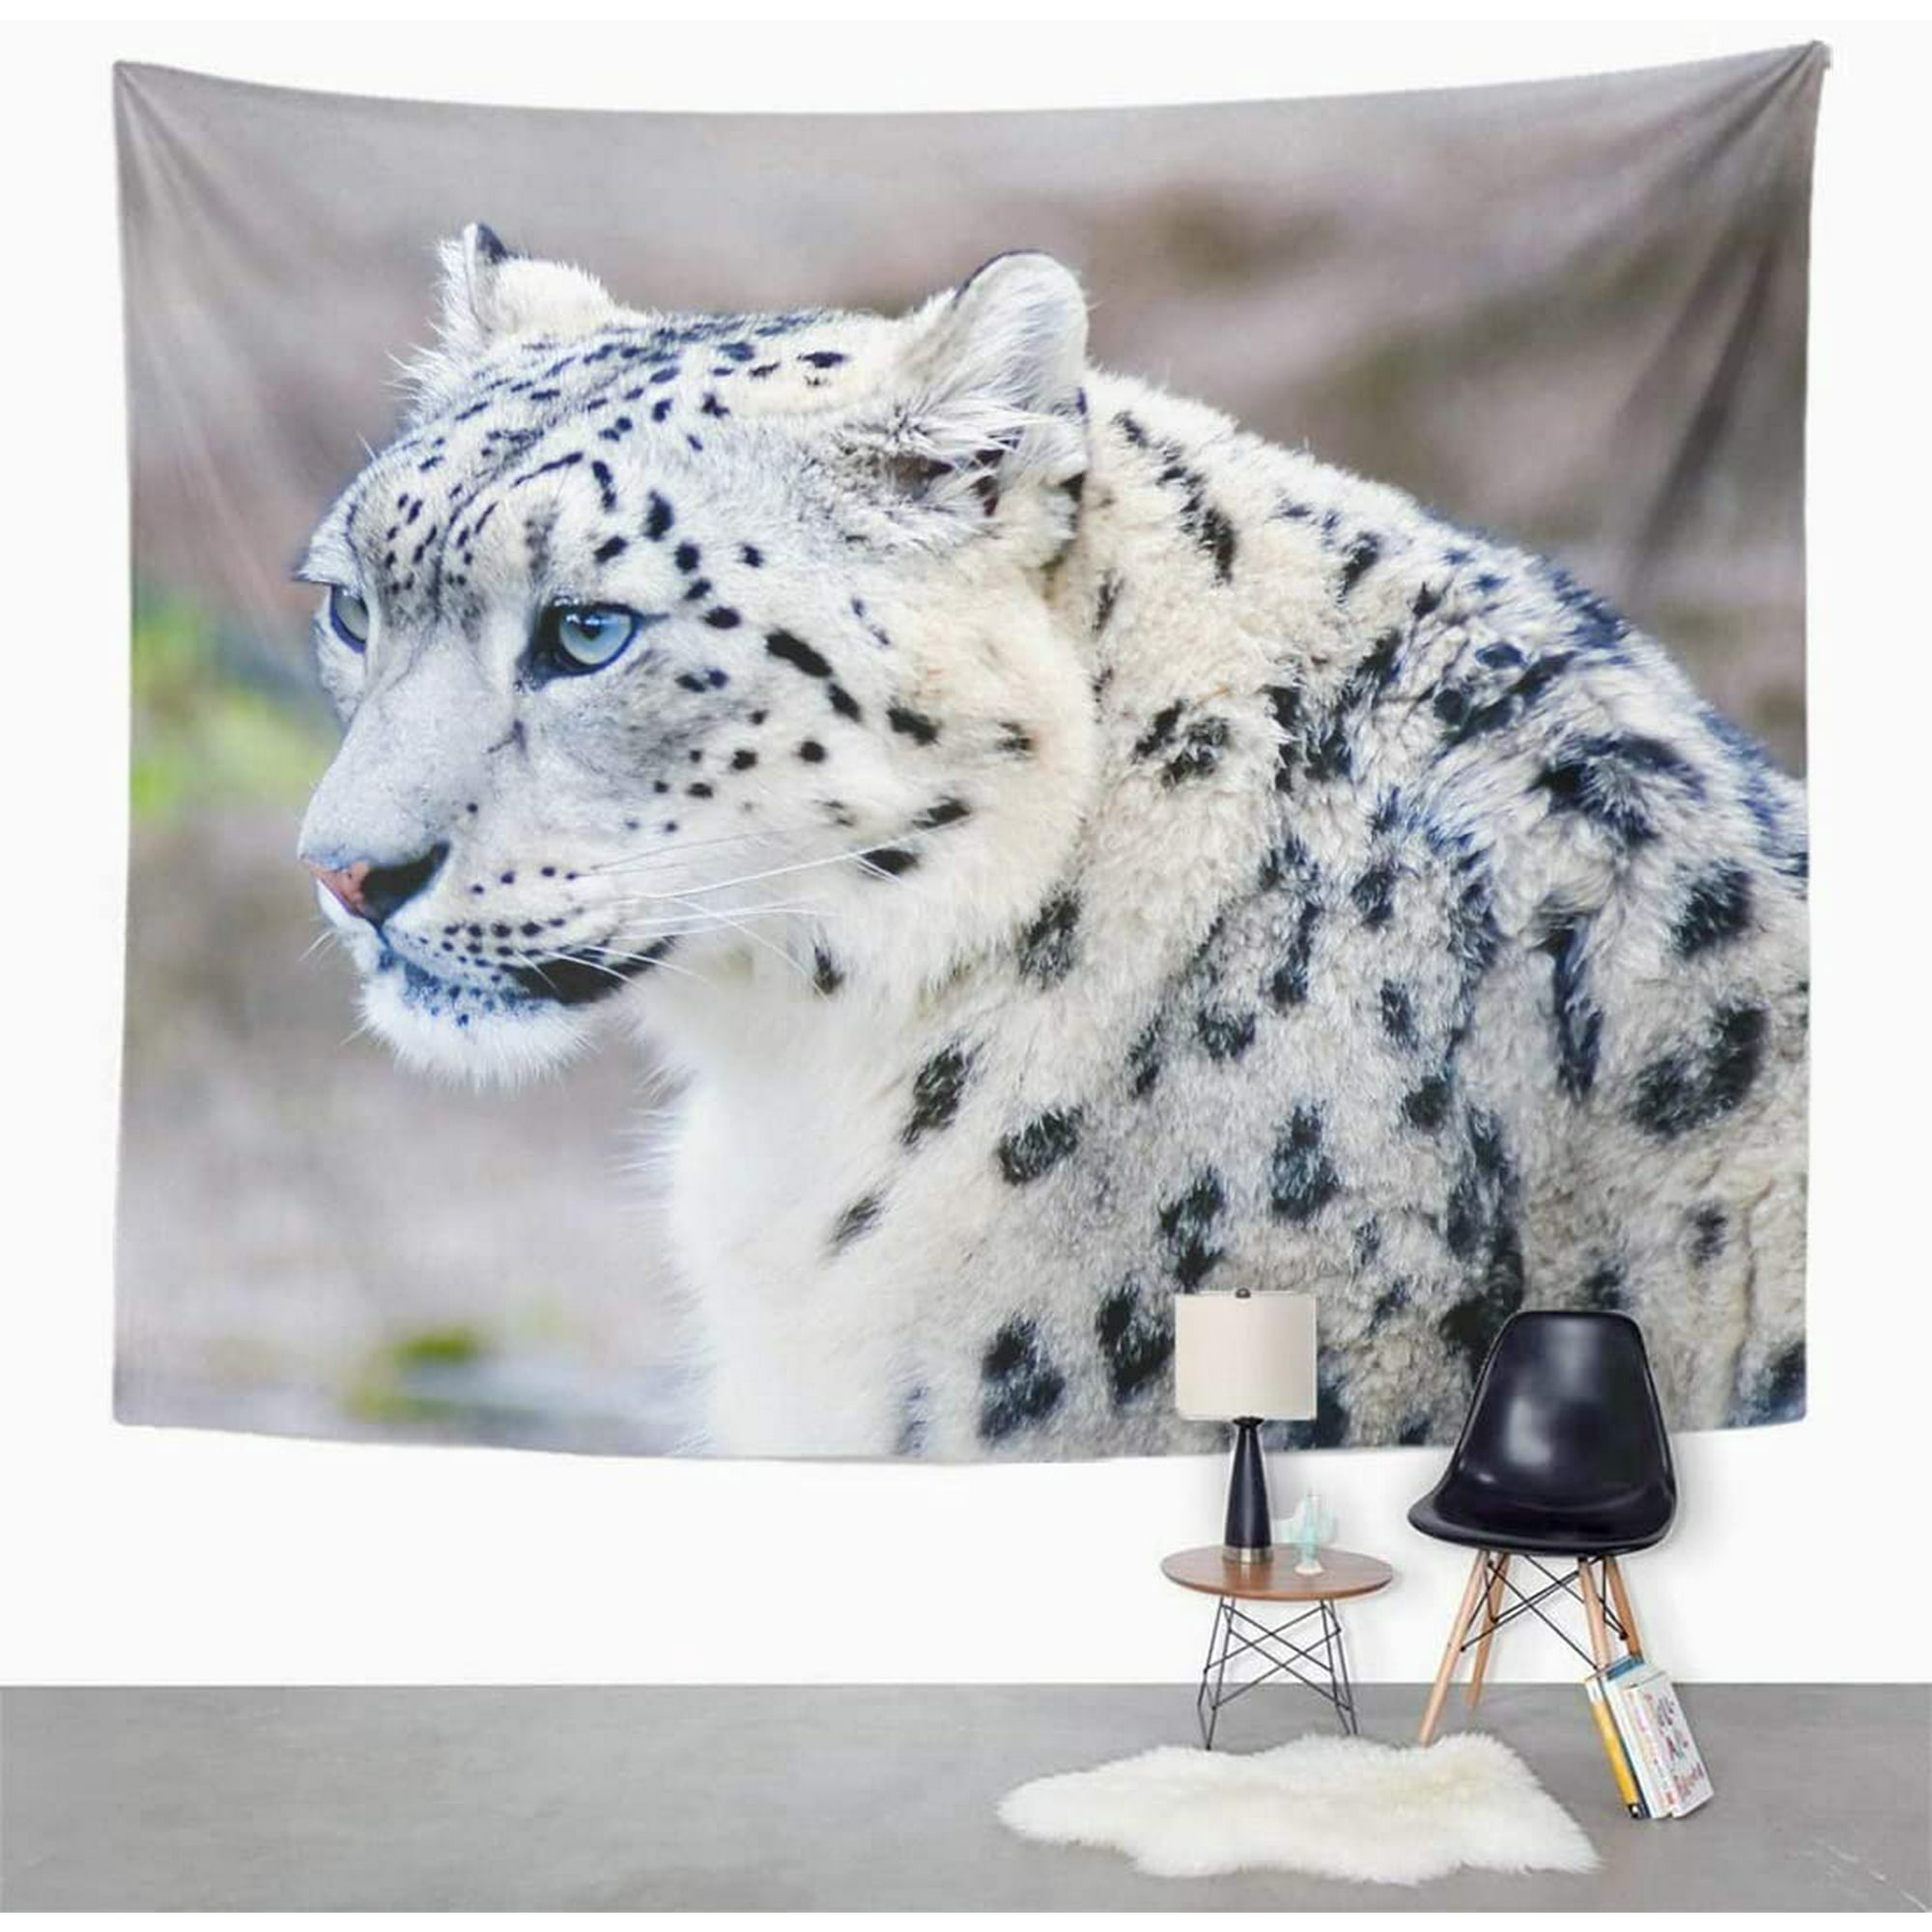 Tapestry Wall Hanging Blue Zoo The Rare Snow Leopard White Animal 50 X 60 Home Decor Art Tapestries For Bedroom Living Room Dorm Apartment Canada - Snow Leopard Home Decor